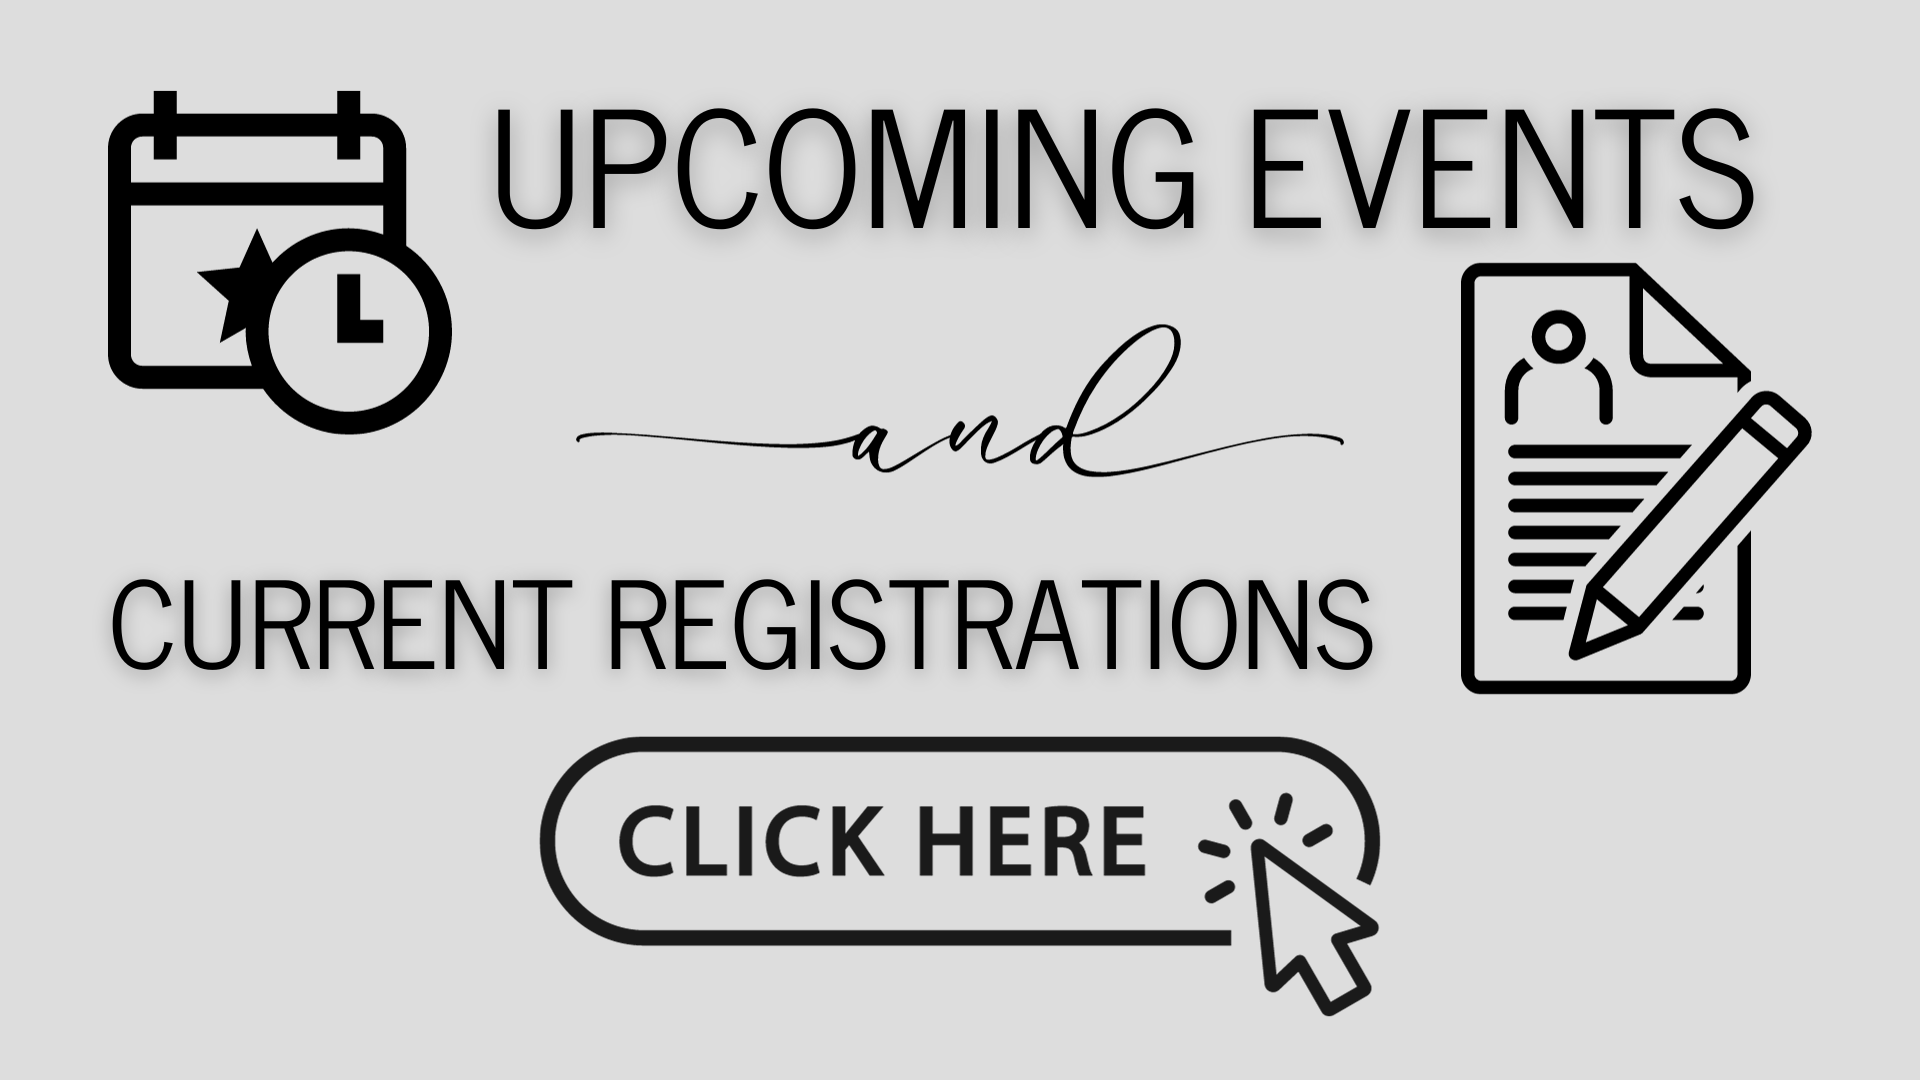 Website upcoming events and current registrations